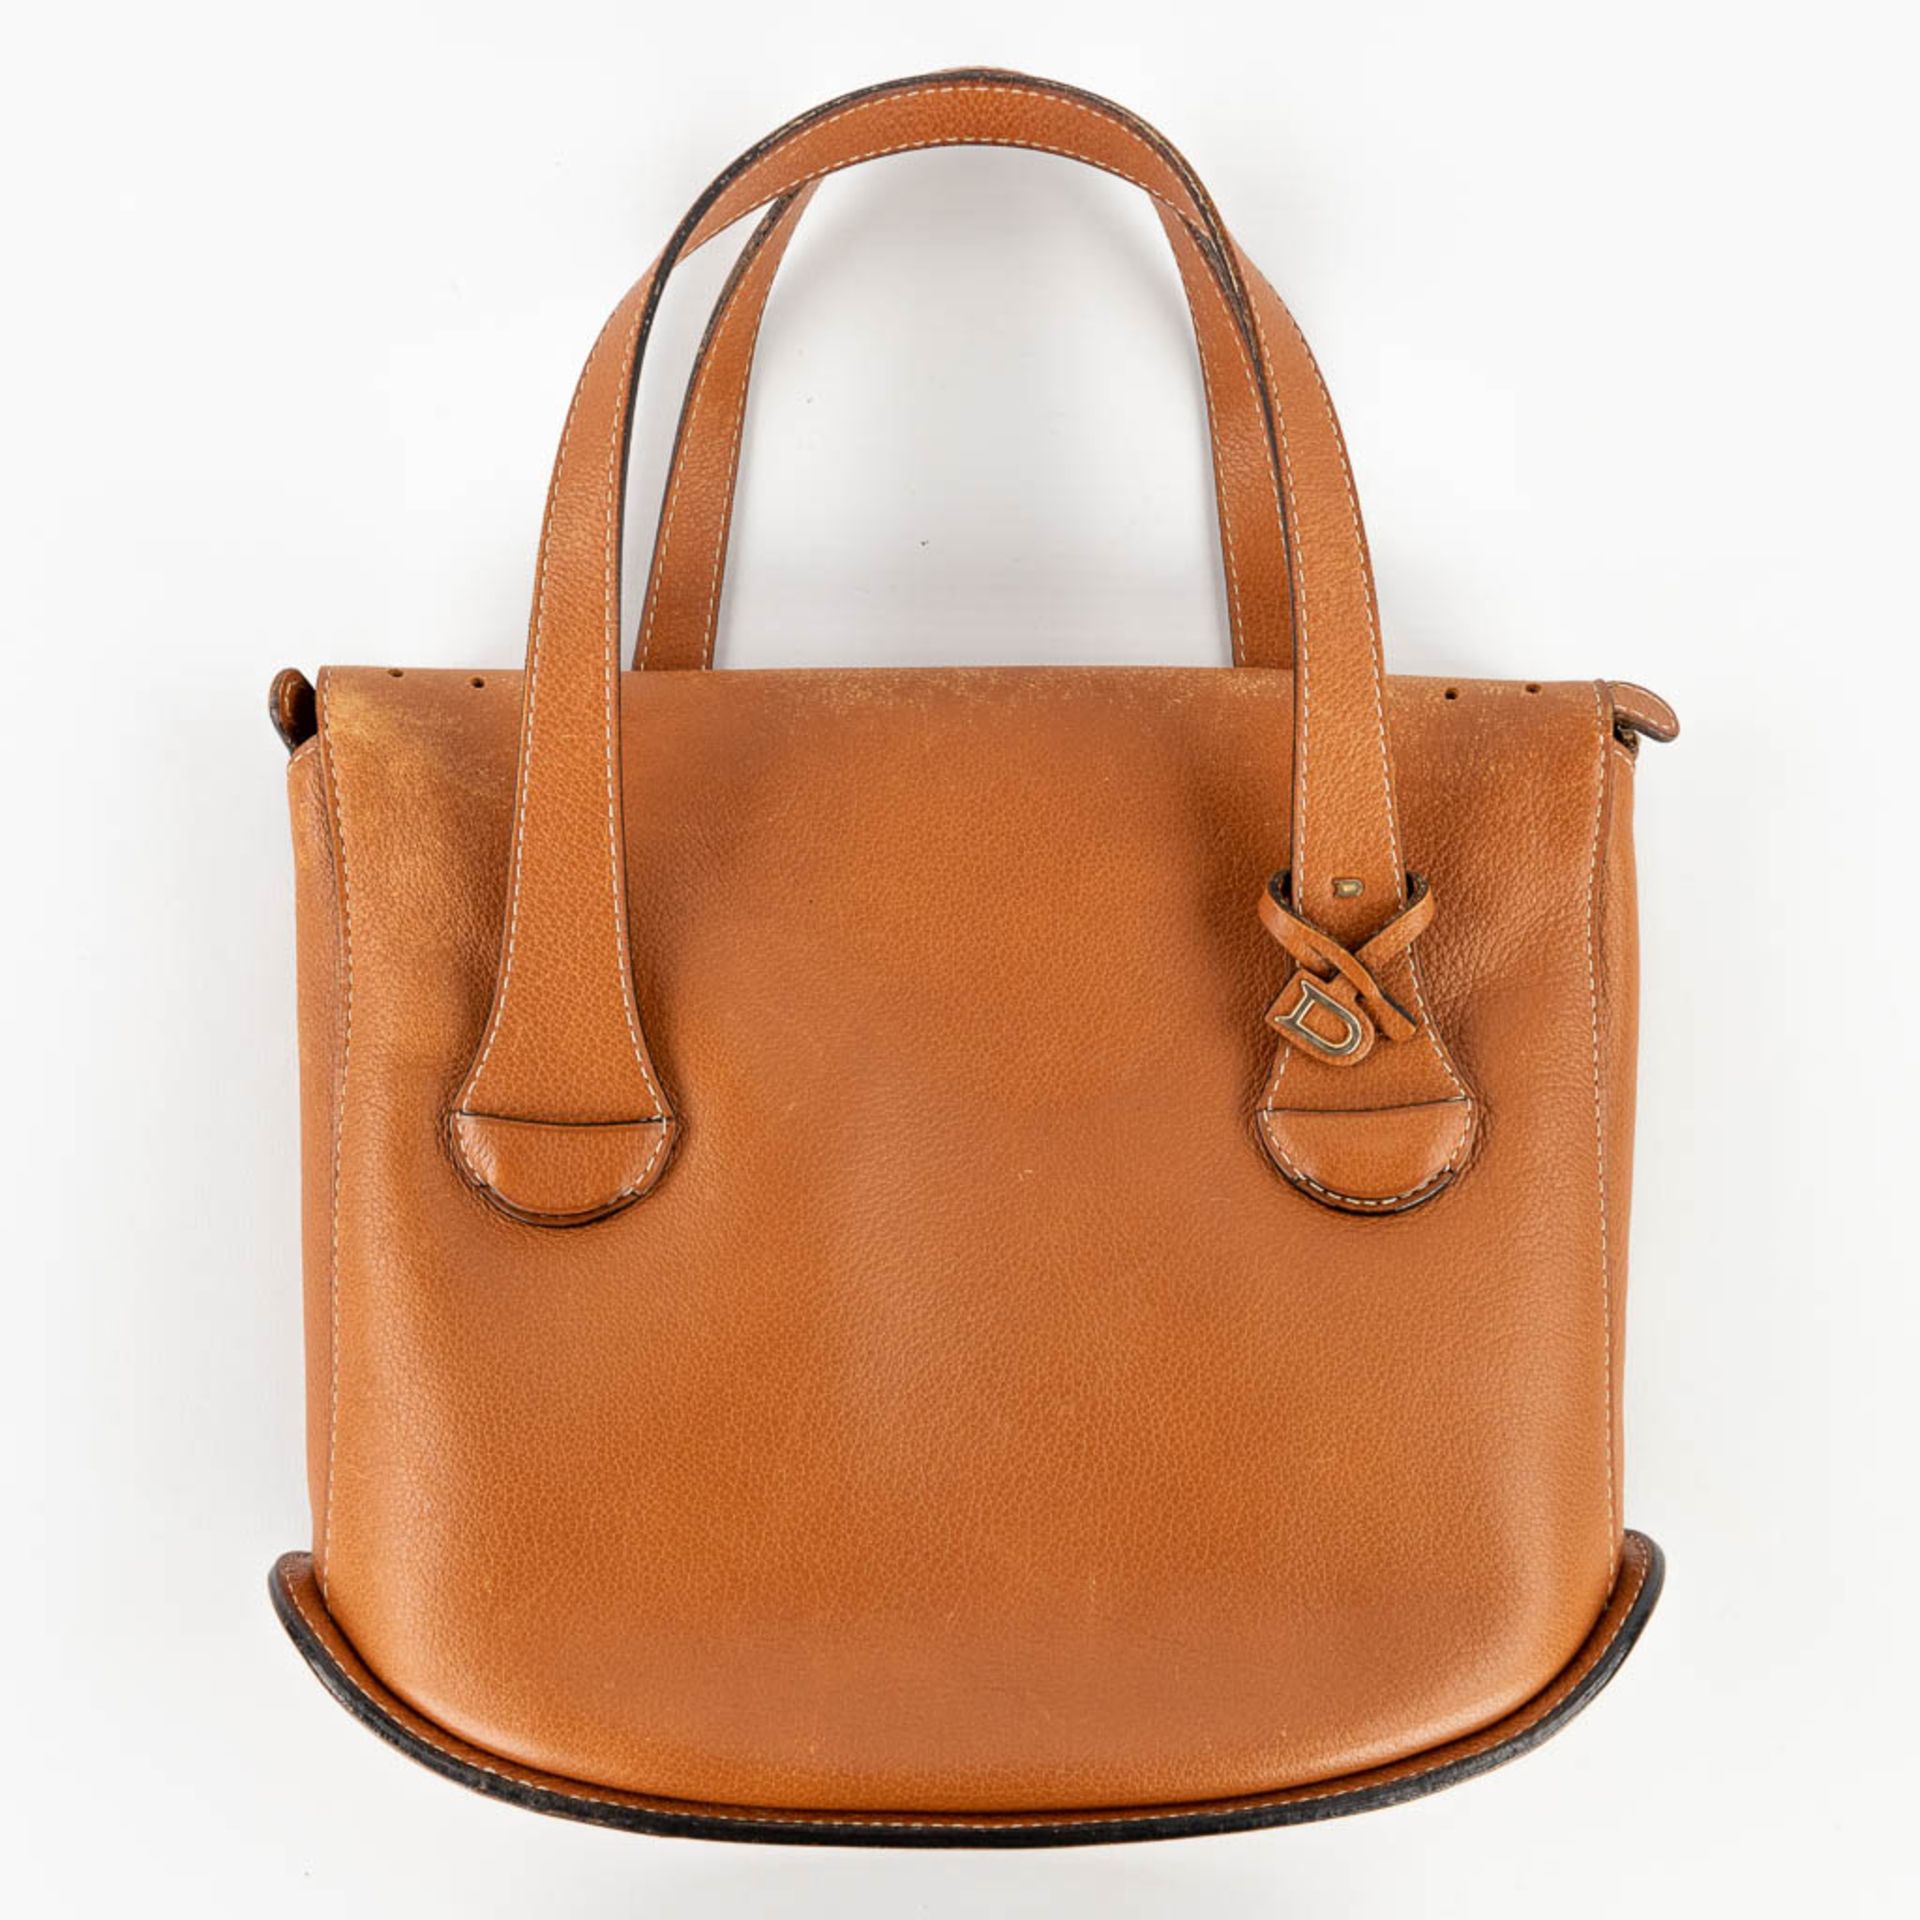 Delvaux Memoire PM, with the original purse, made of cognac-coloured leather. (L: 10 x W: 26 x H: 20 - Image 11 of 27